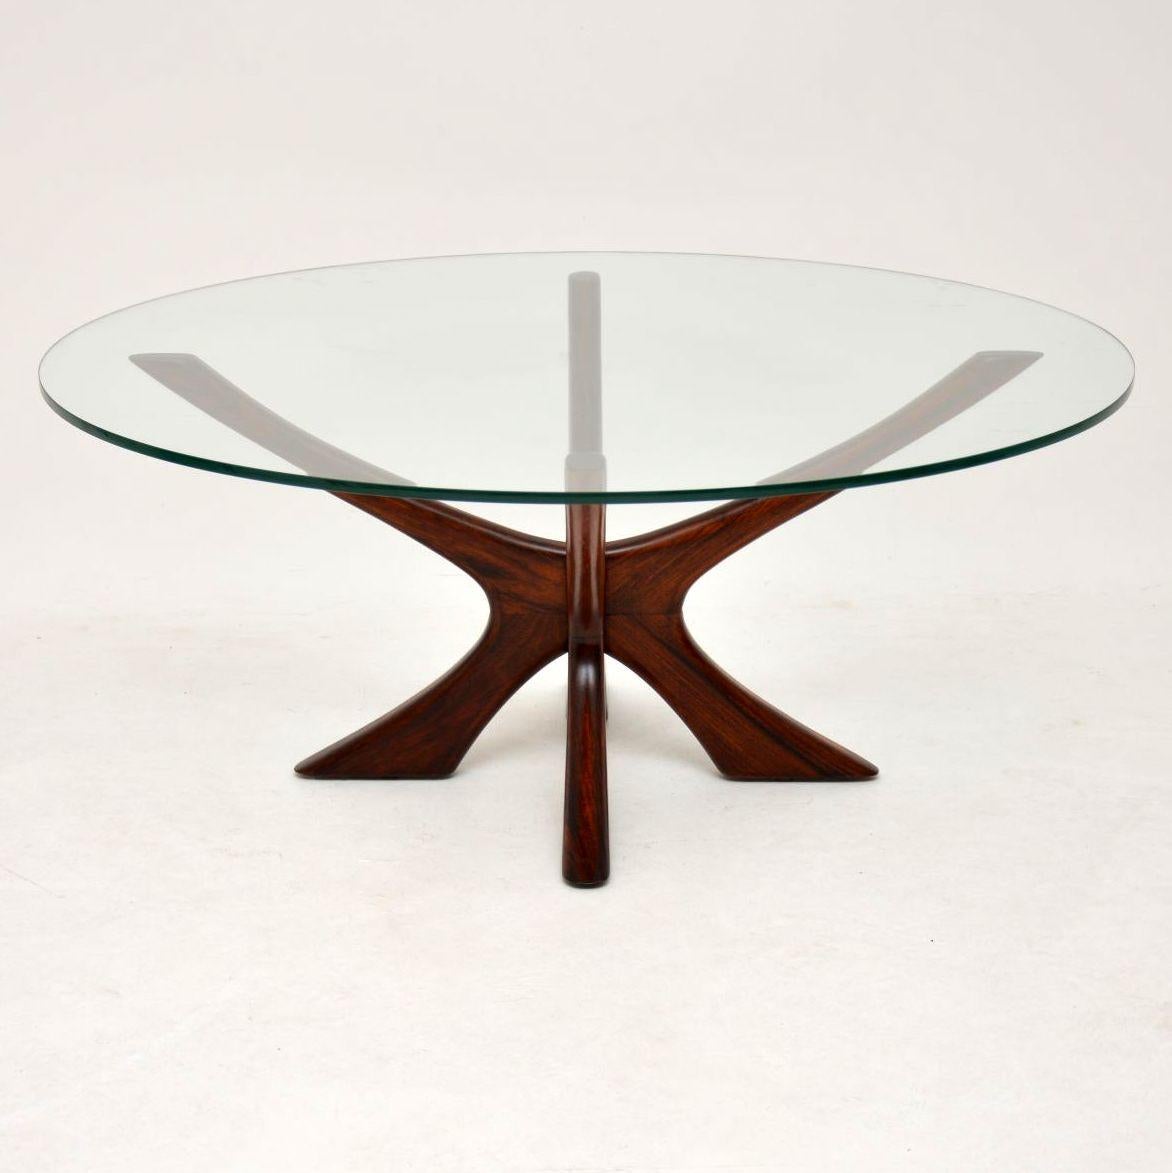 A stunning and extremely well made vintage coffee table, this was made in Denmark in the 1960’s. It was designed by Illum Wikkelso, it’s called the ‘Jax’ coffee table, and was manufactured by Neils Eilersen. We have had the base stripped and